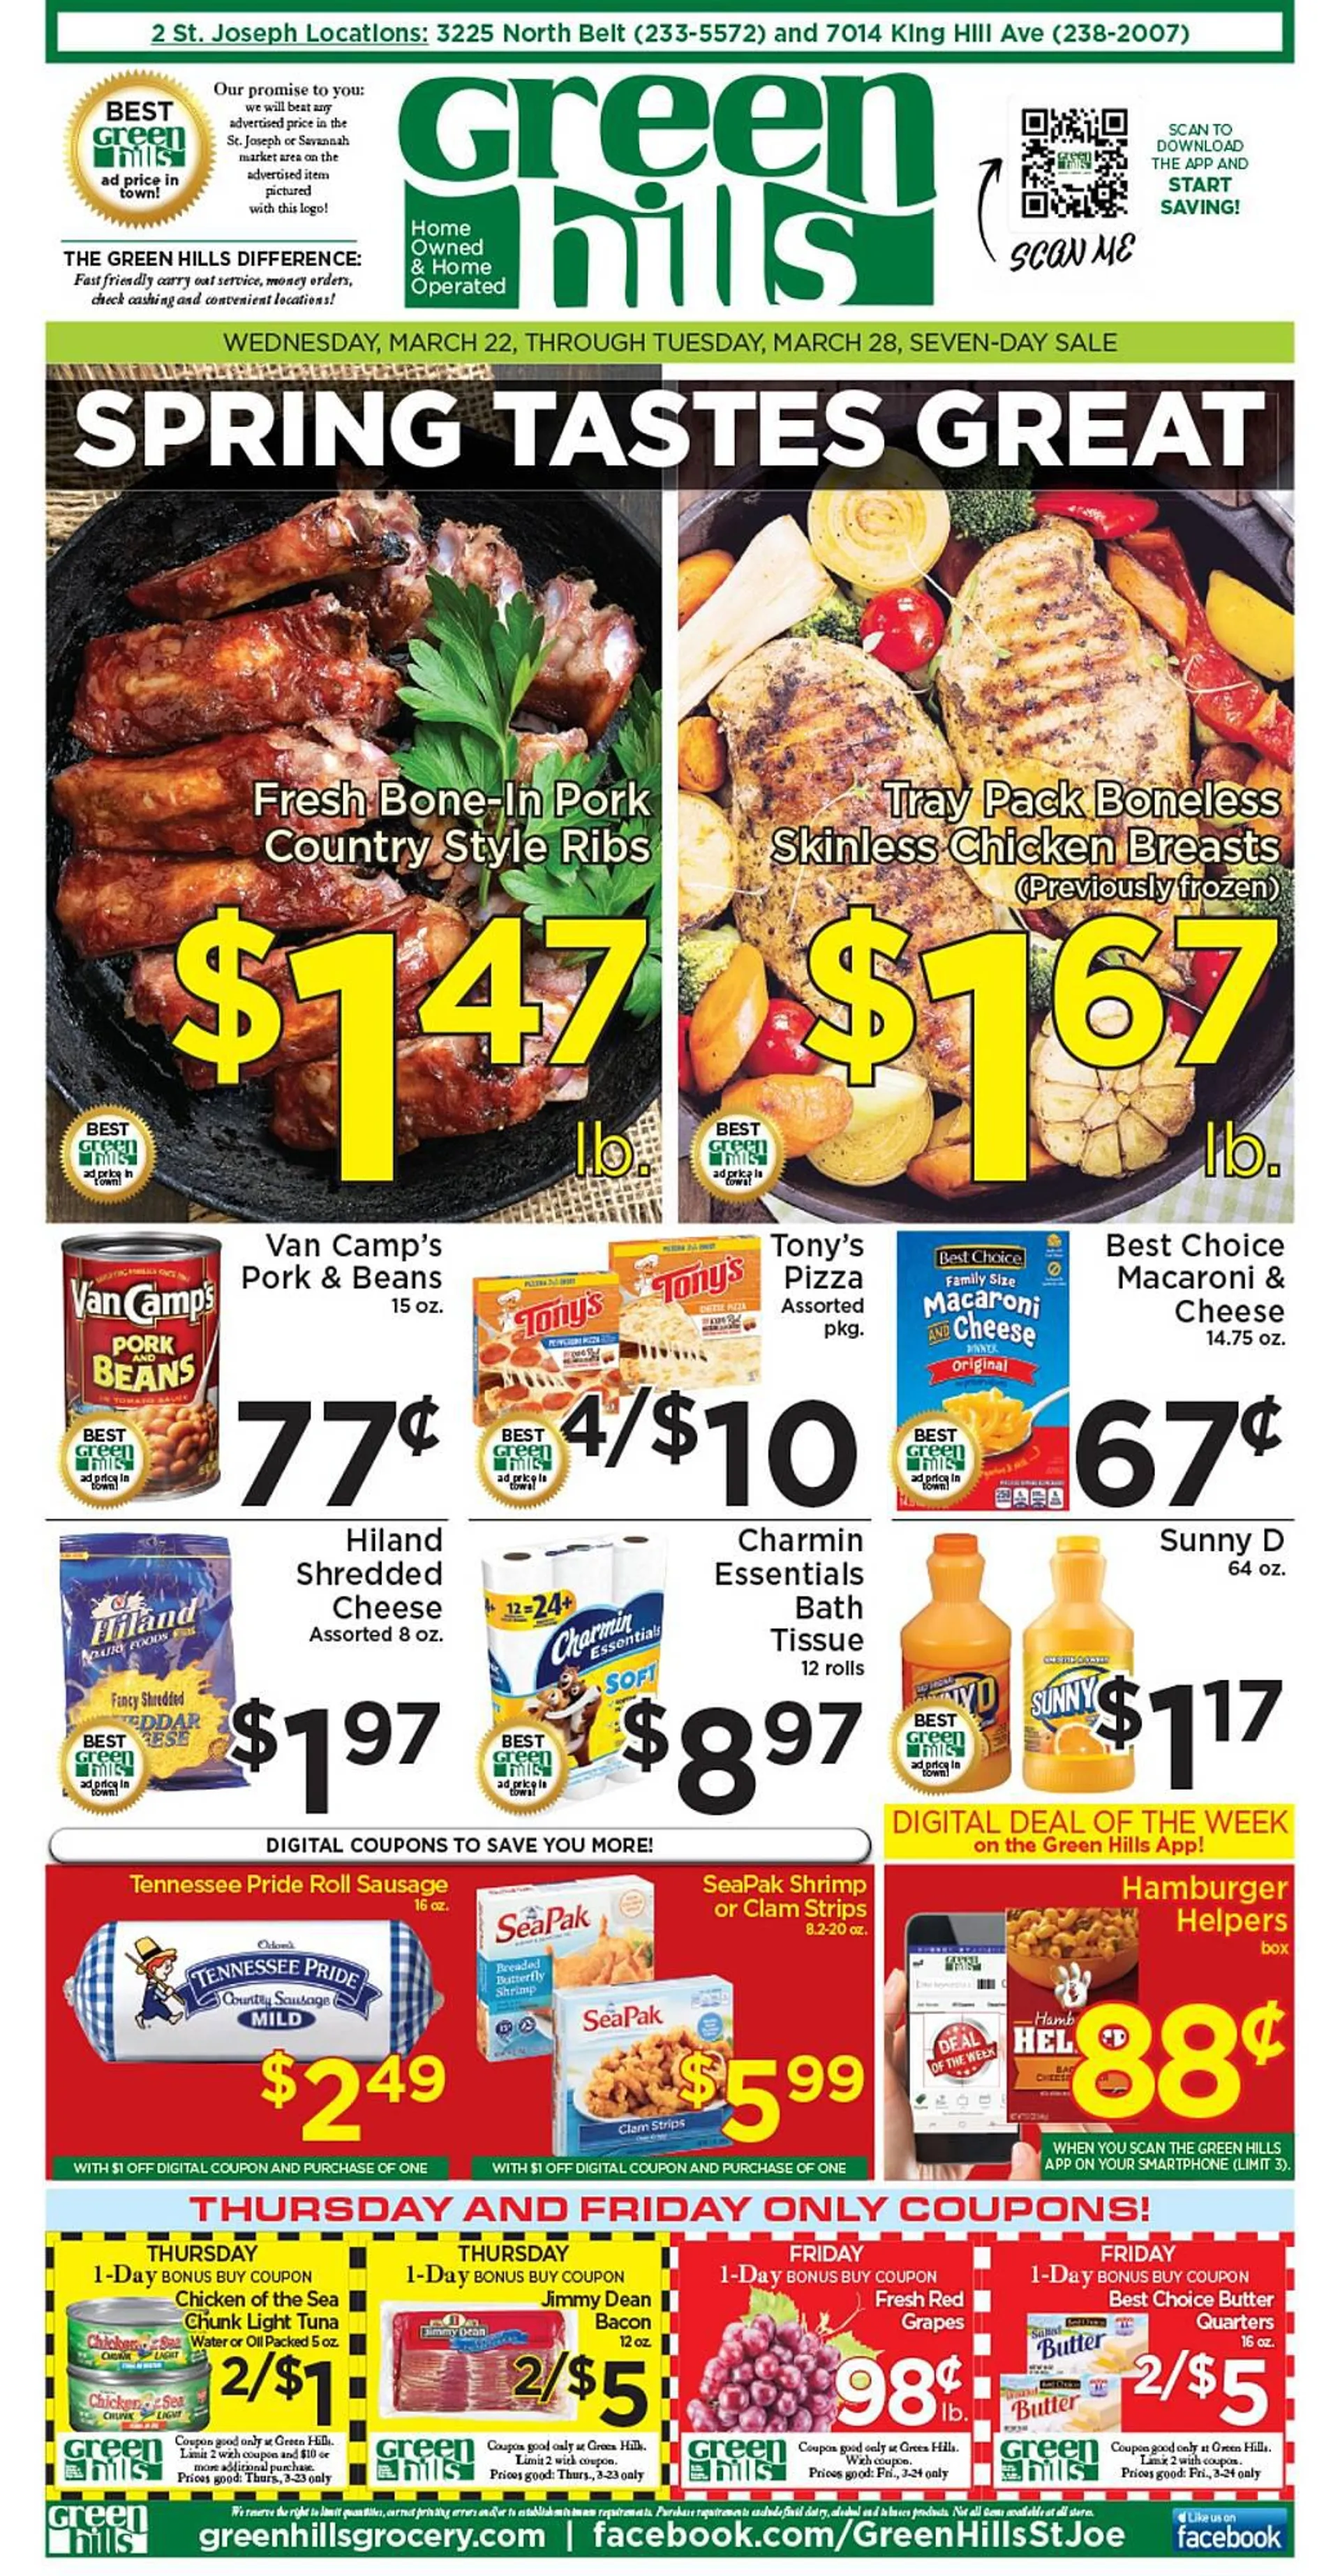 Green Hills Grocery ad - 1